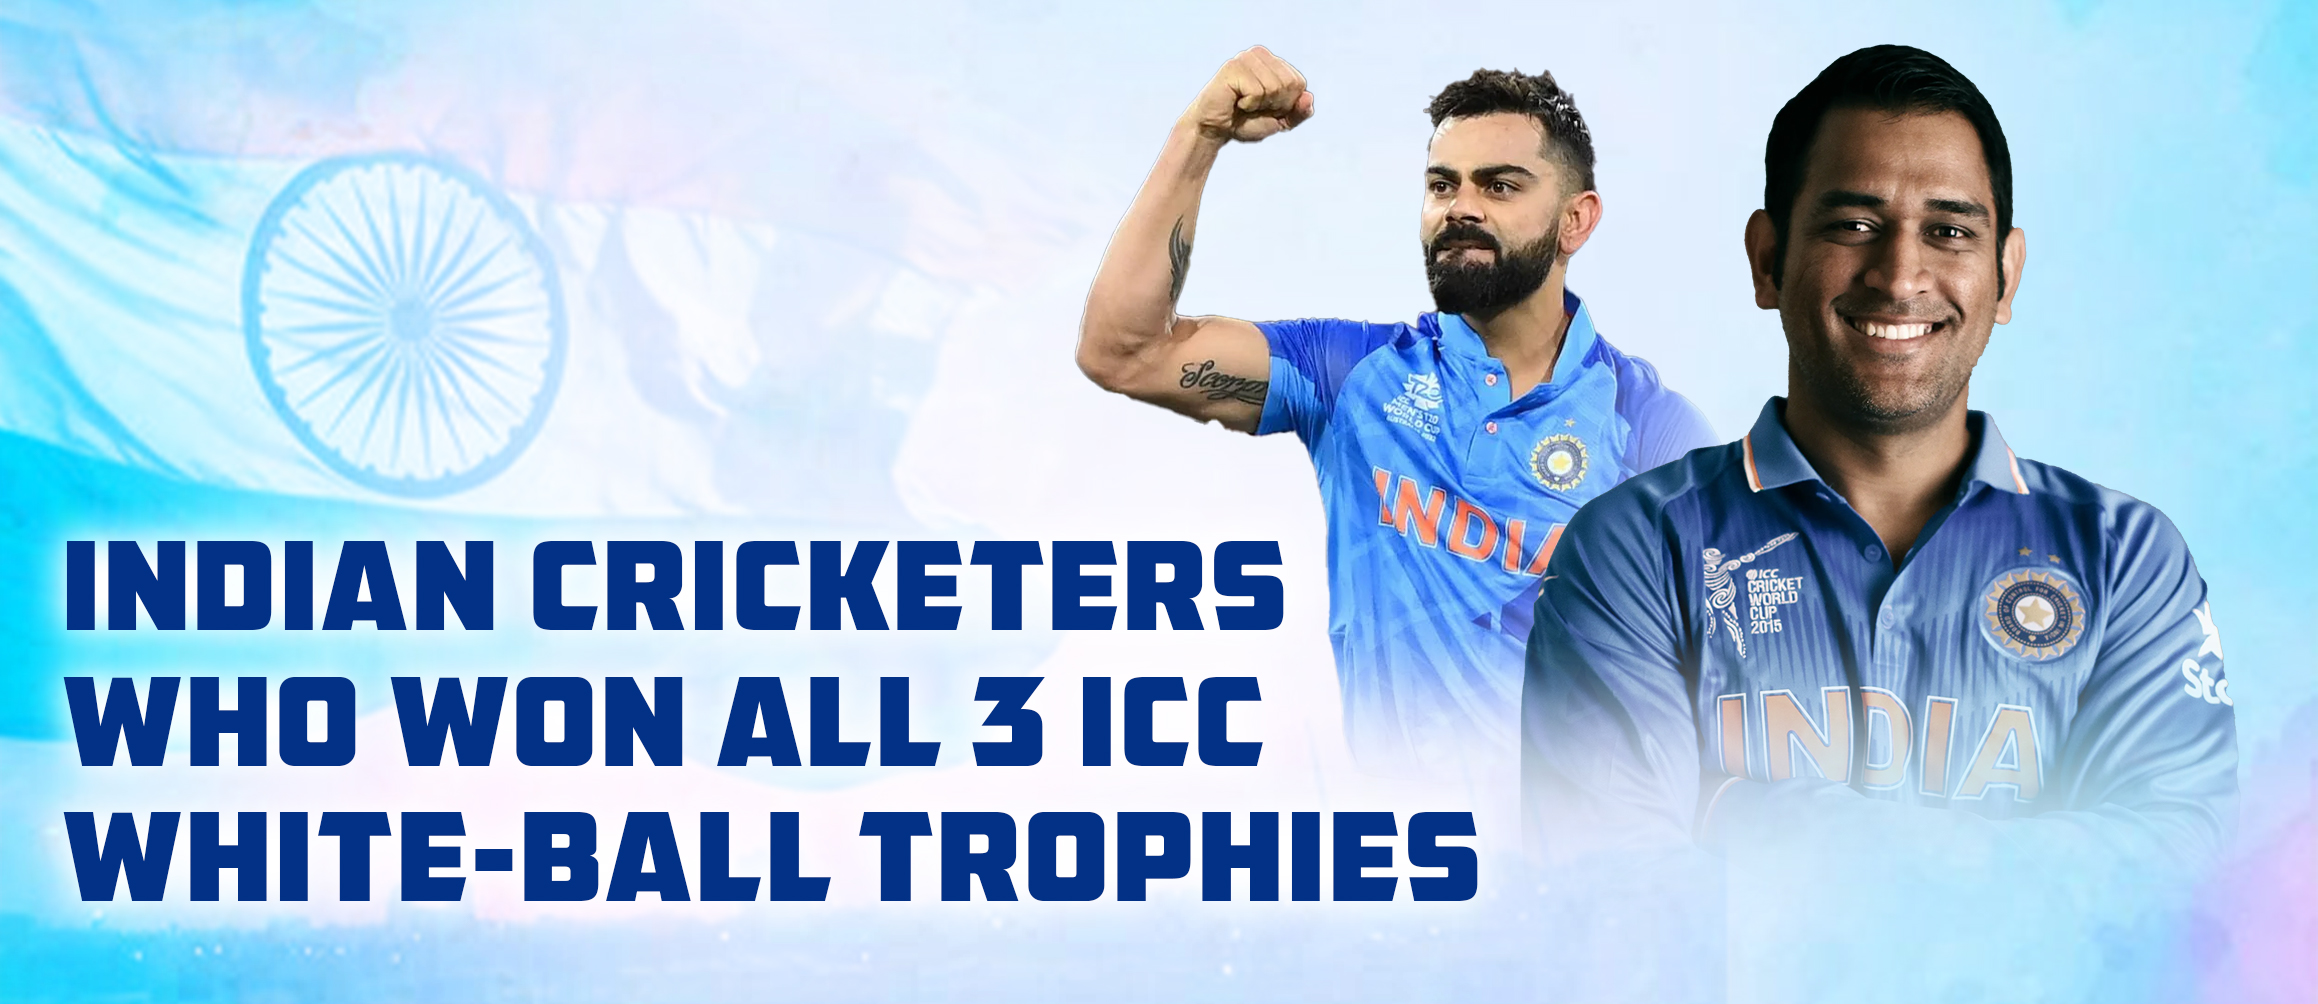 Indian cricketers who won all 3 ICC white-ball trophies